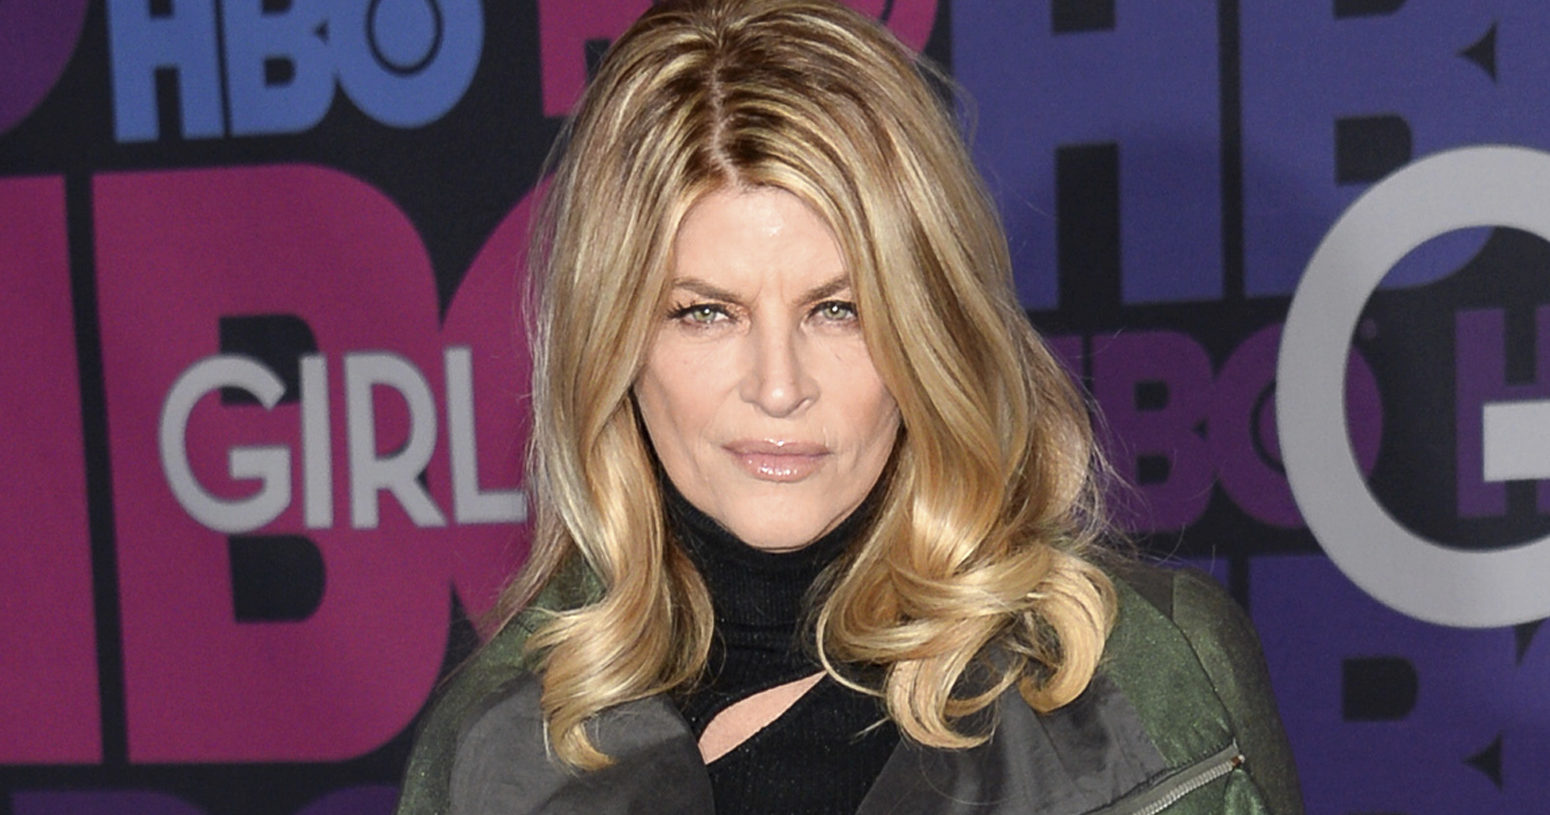 Kirstie Alley attends the New York premiere of HBO's "Girls" on Jan. 5, 2015. The two-time Emmy winner has died at age 71.